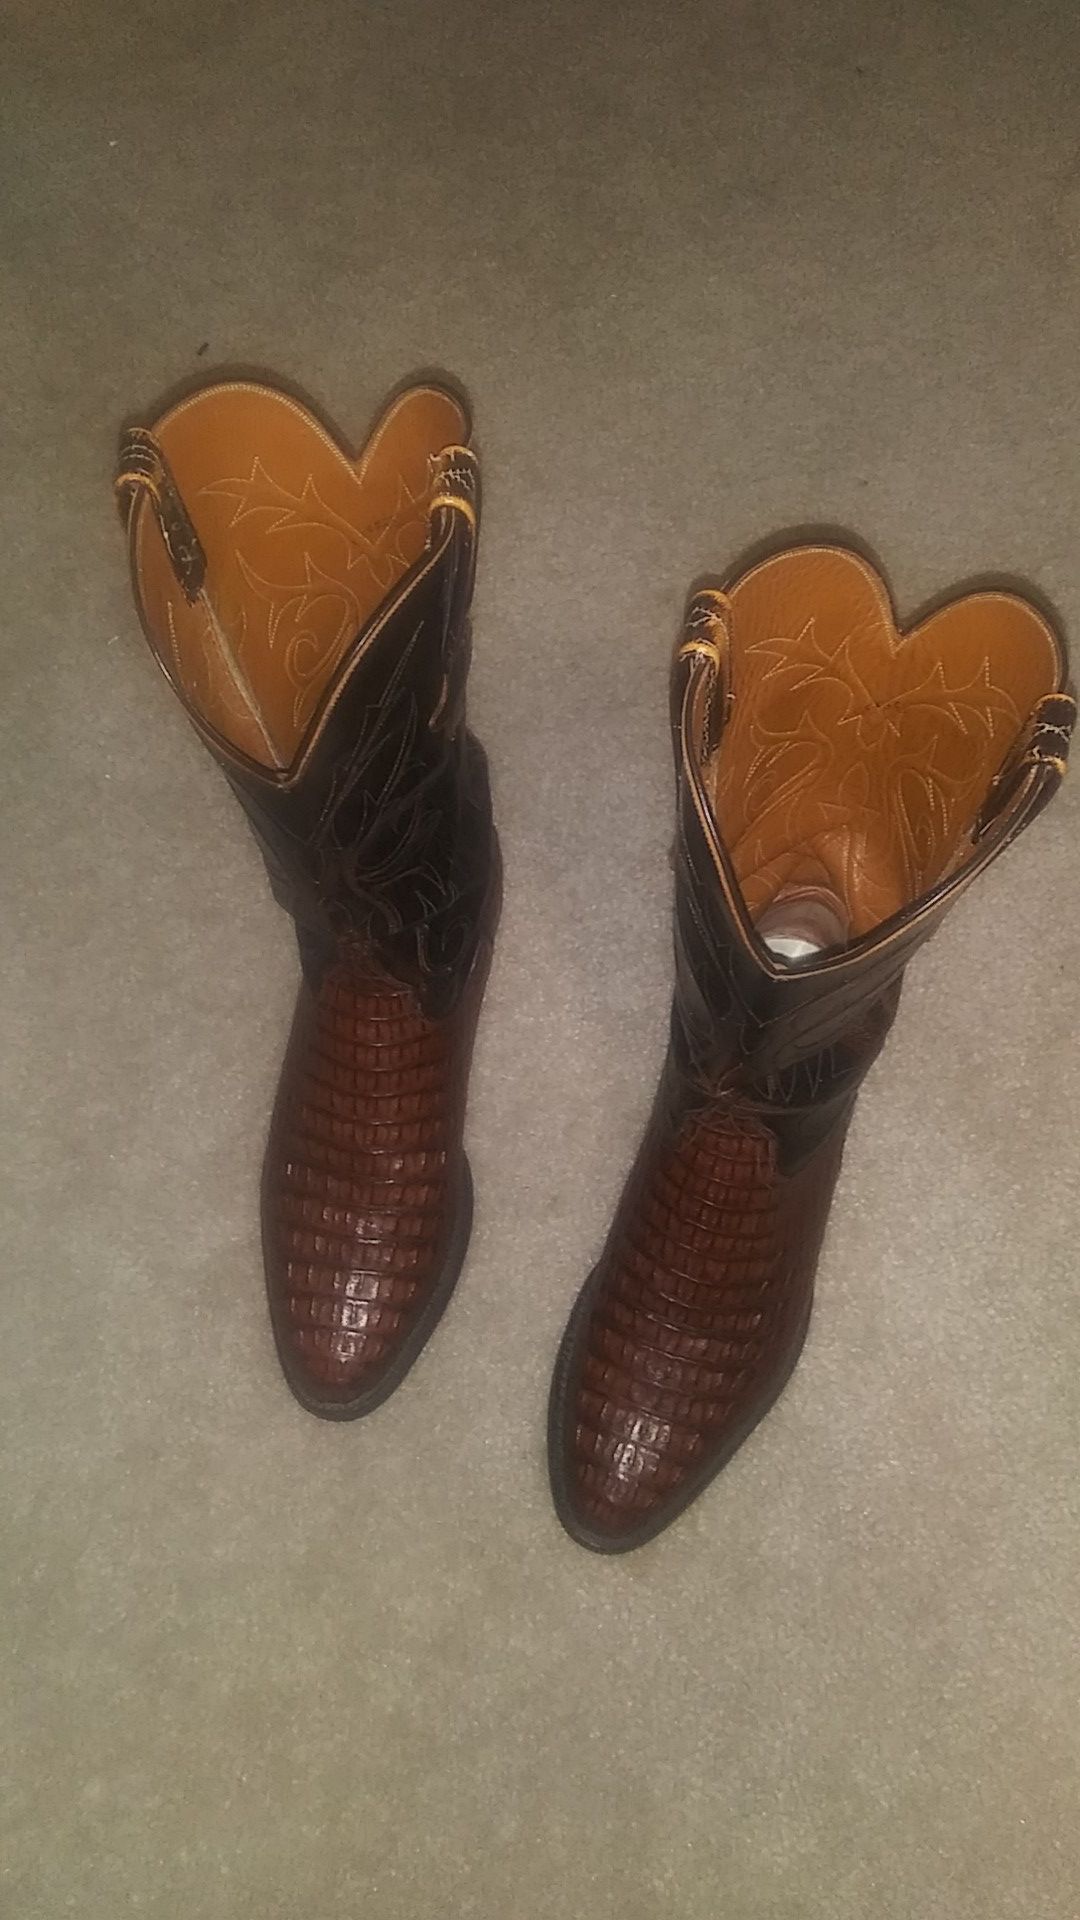 Lucchese Cowboy Boots